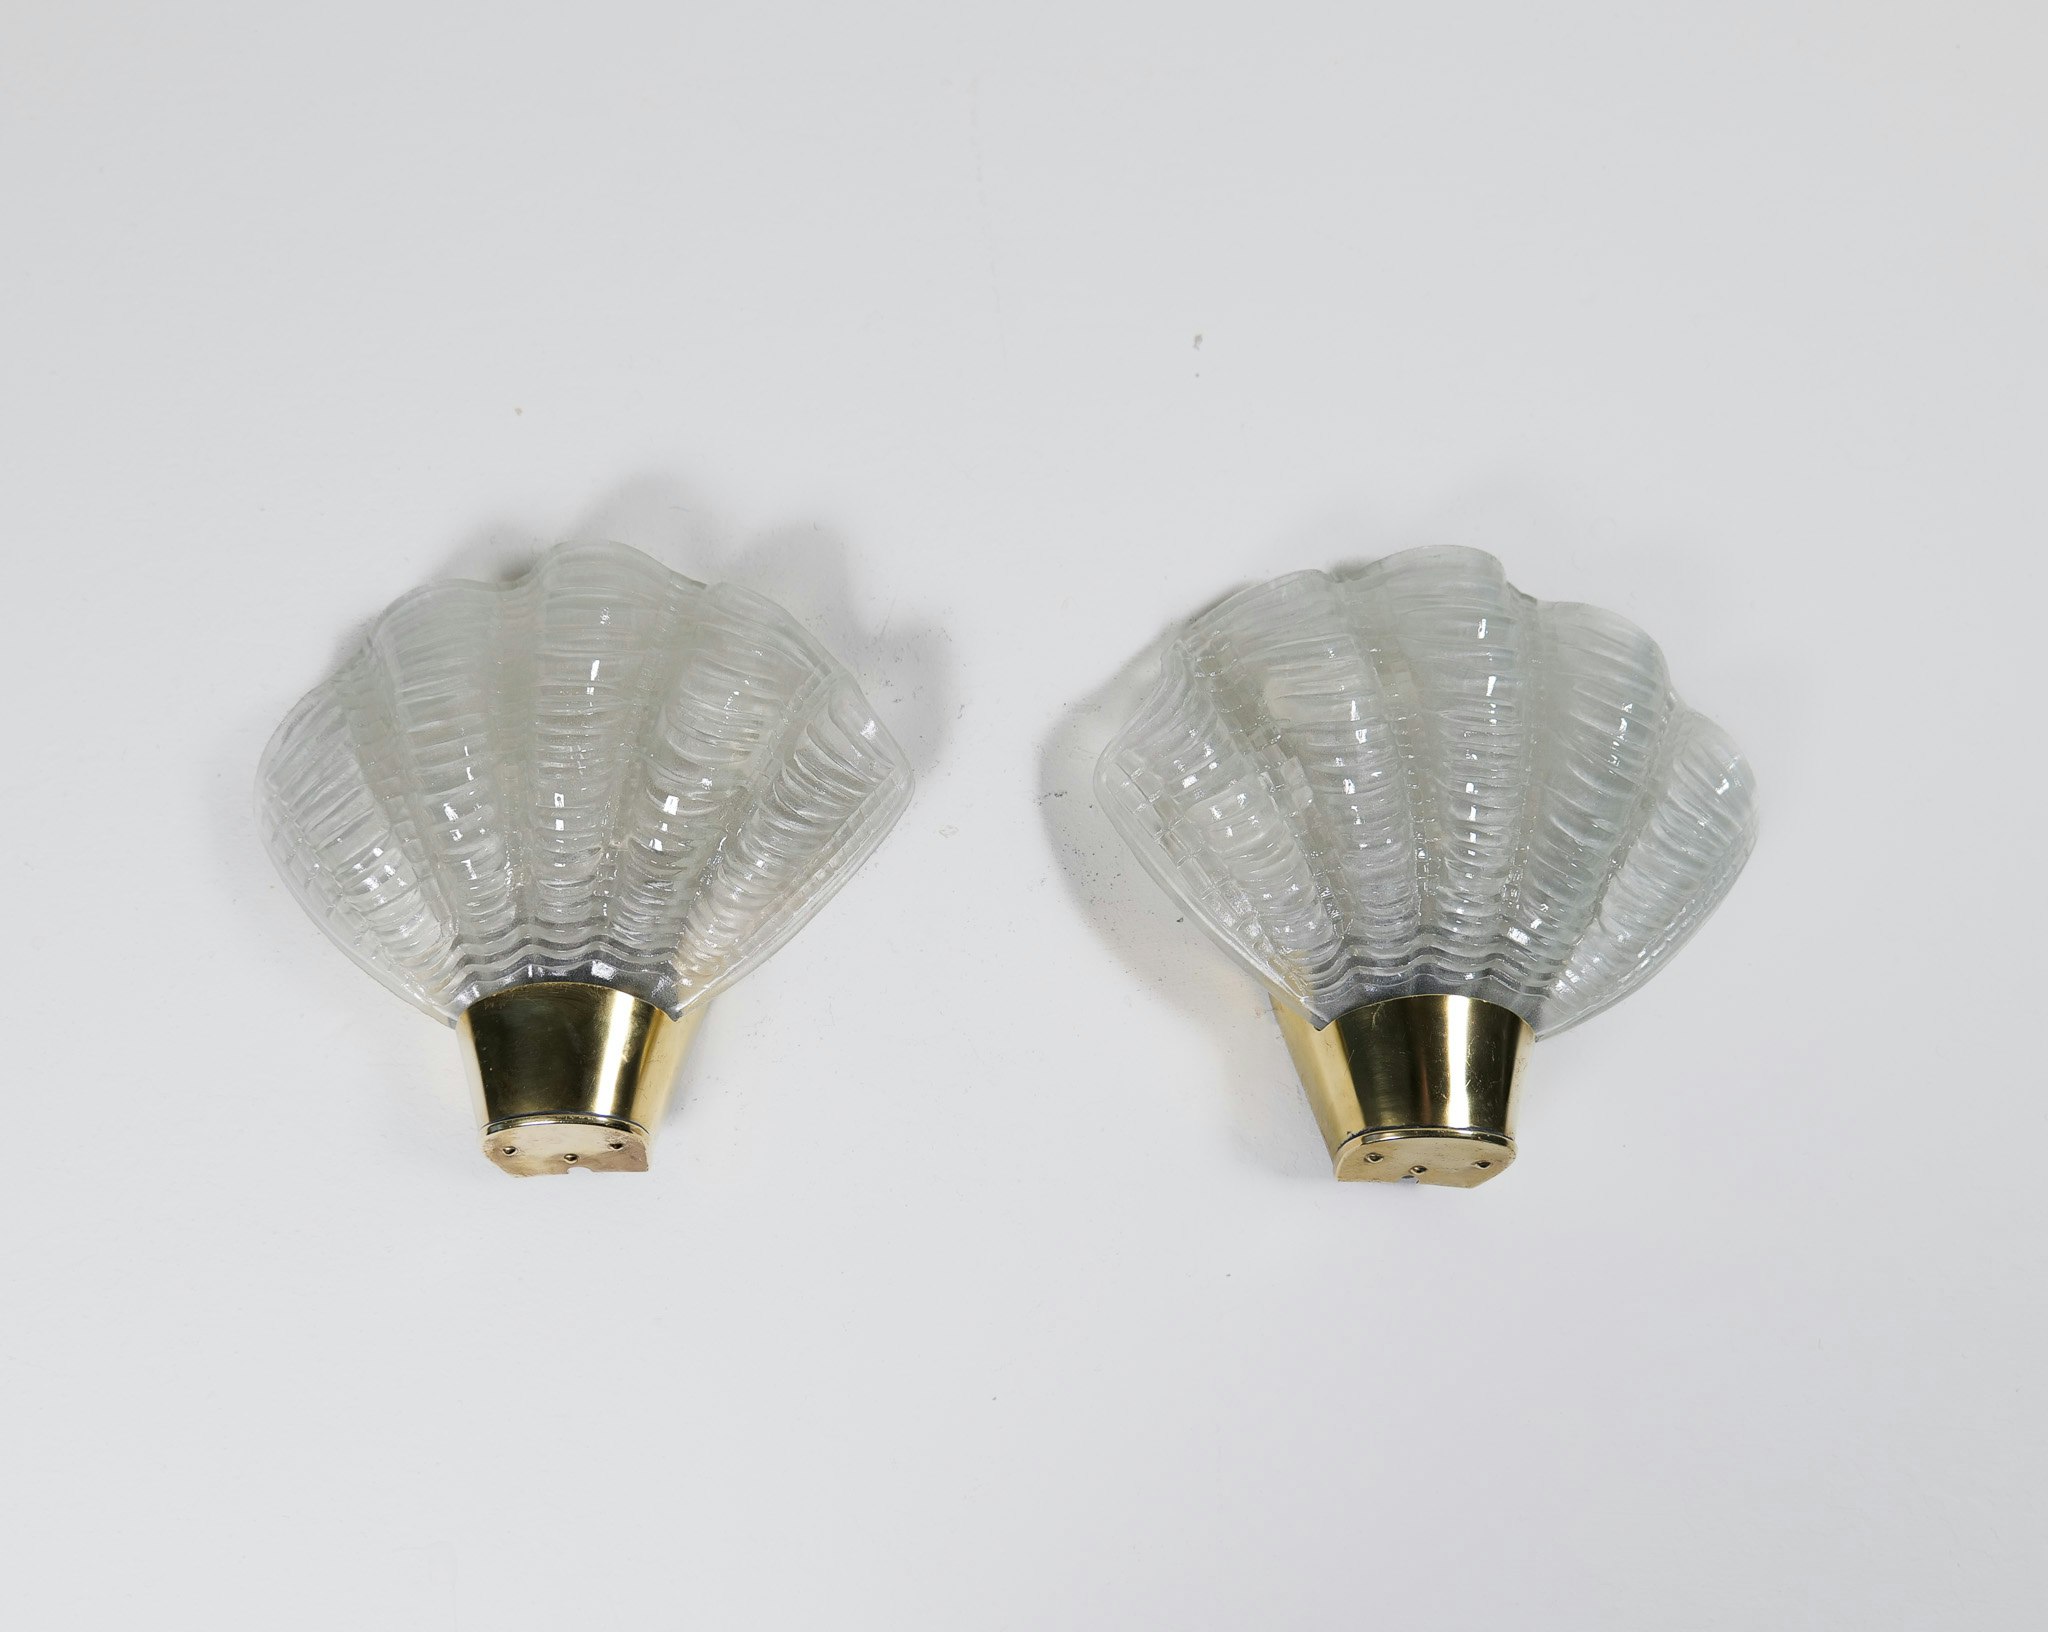 Midcentury Moder Pair of ASEA Wall Lights, "Coquille", 1950s, Sweden